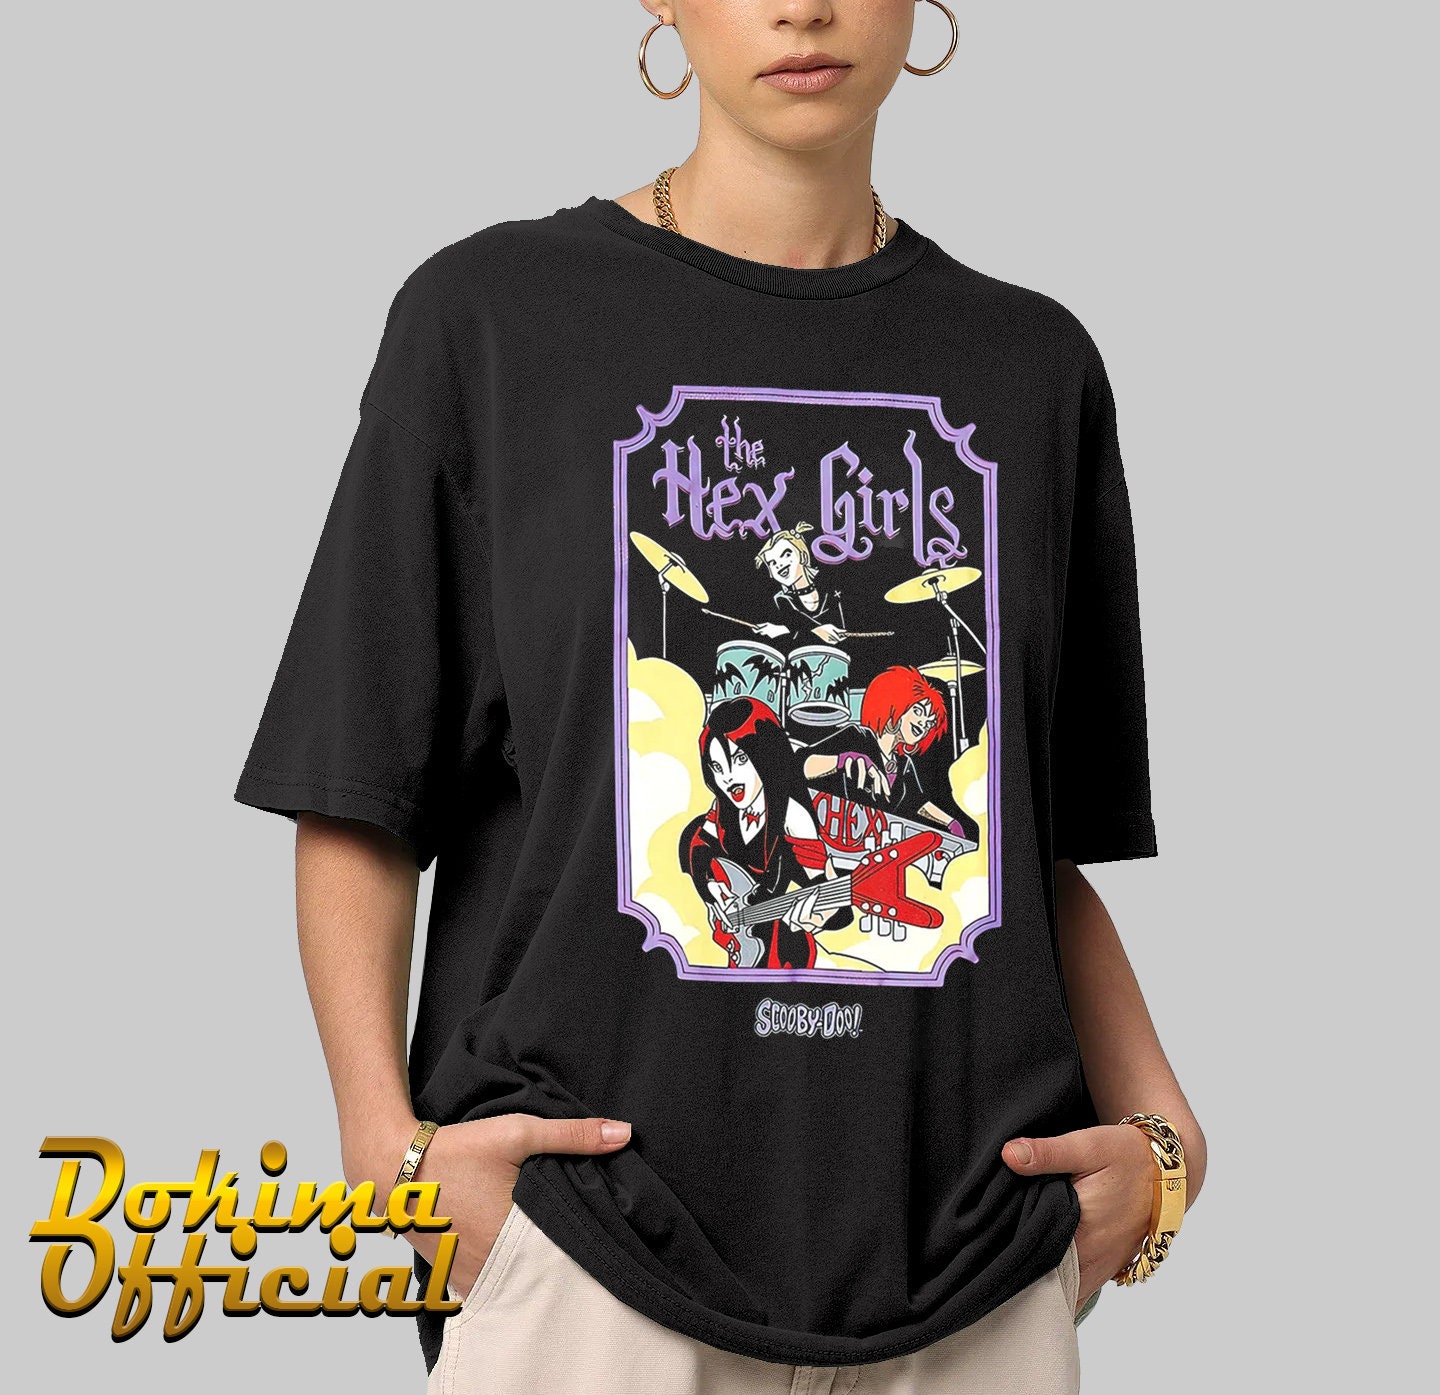 Discover The Hex Girls, Halloween Retro 90er Jahre, Scooby-Doo The Hex Girls T-Shirt